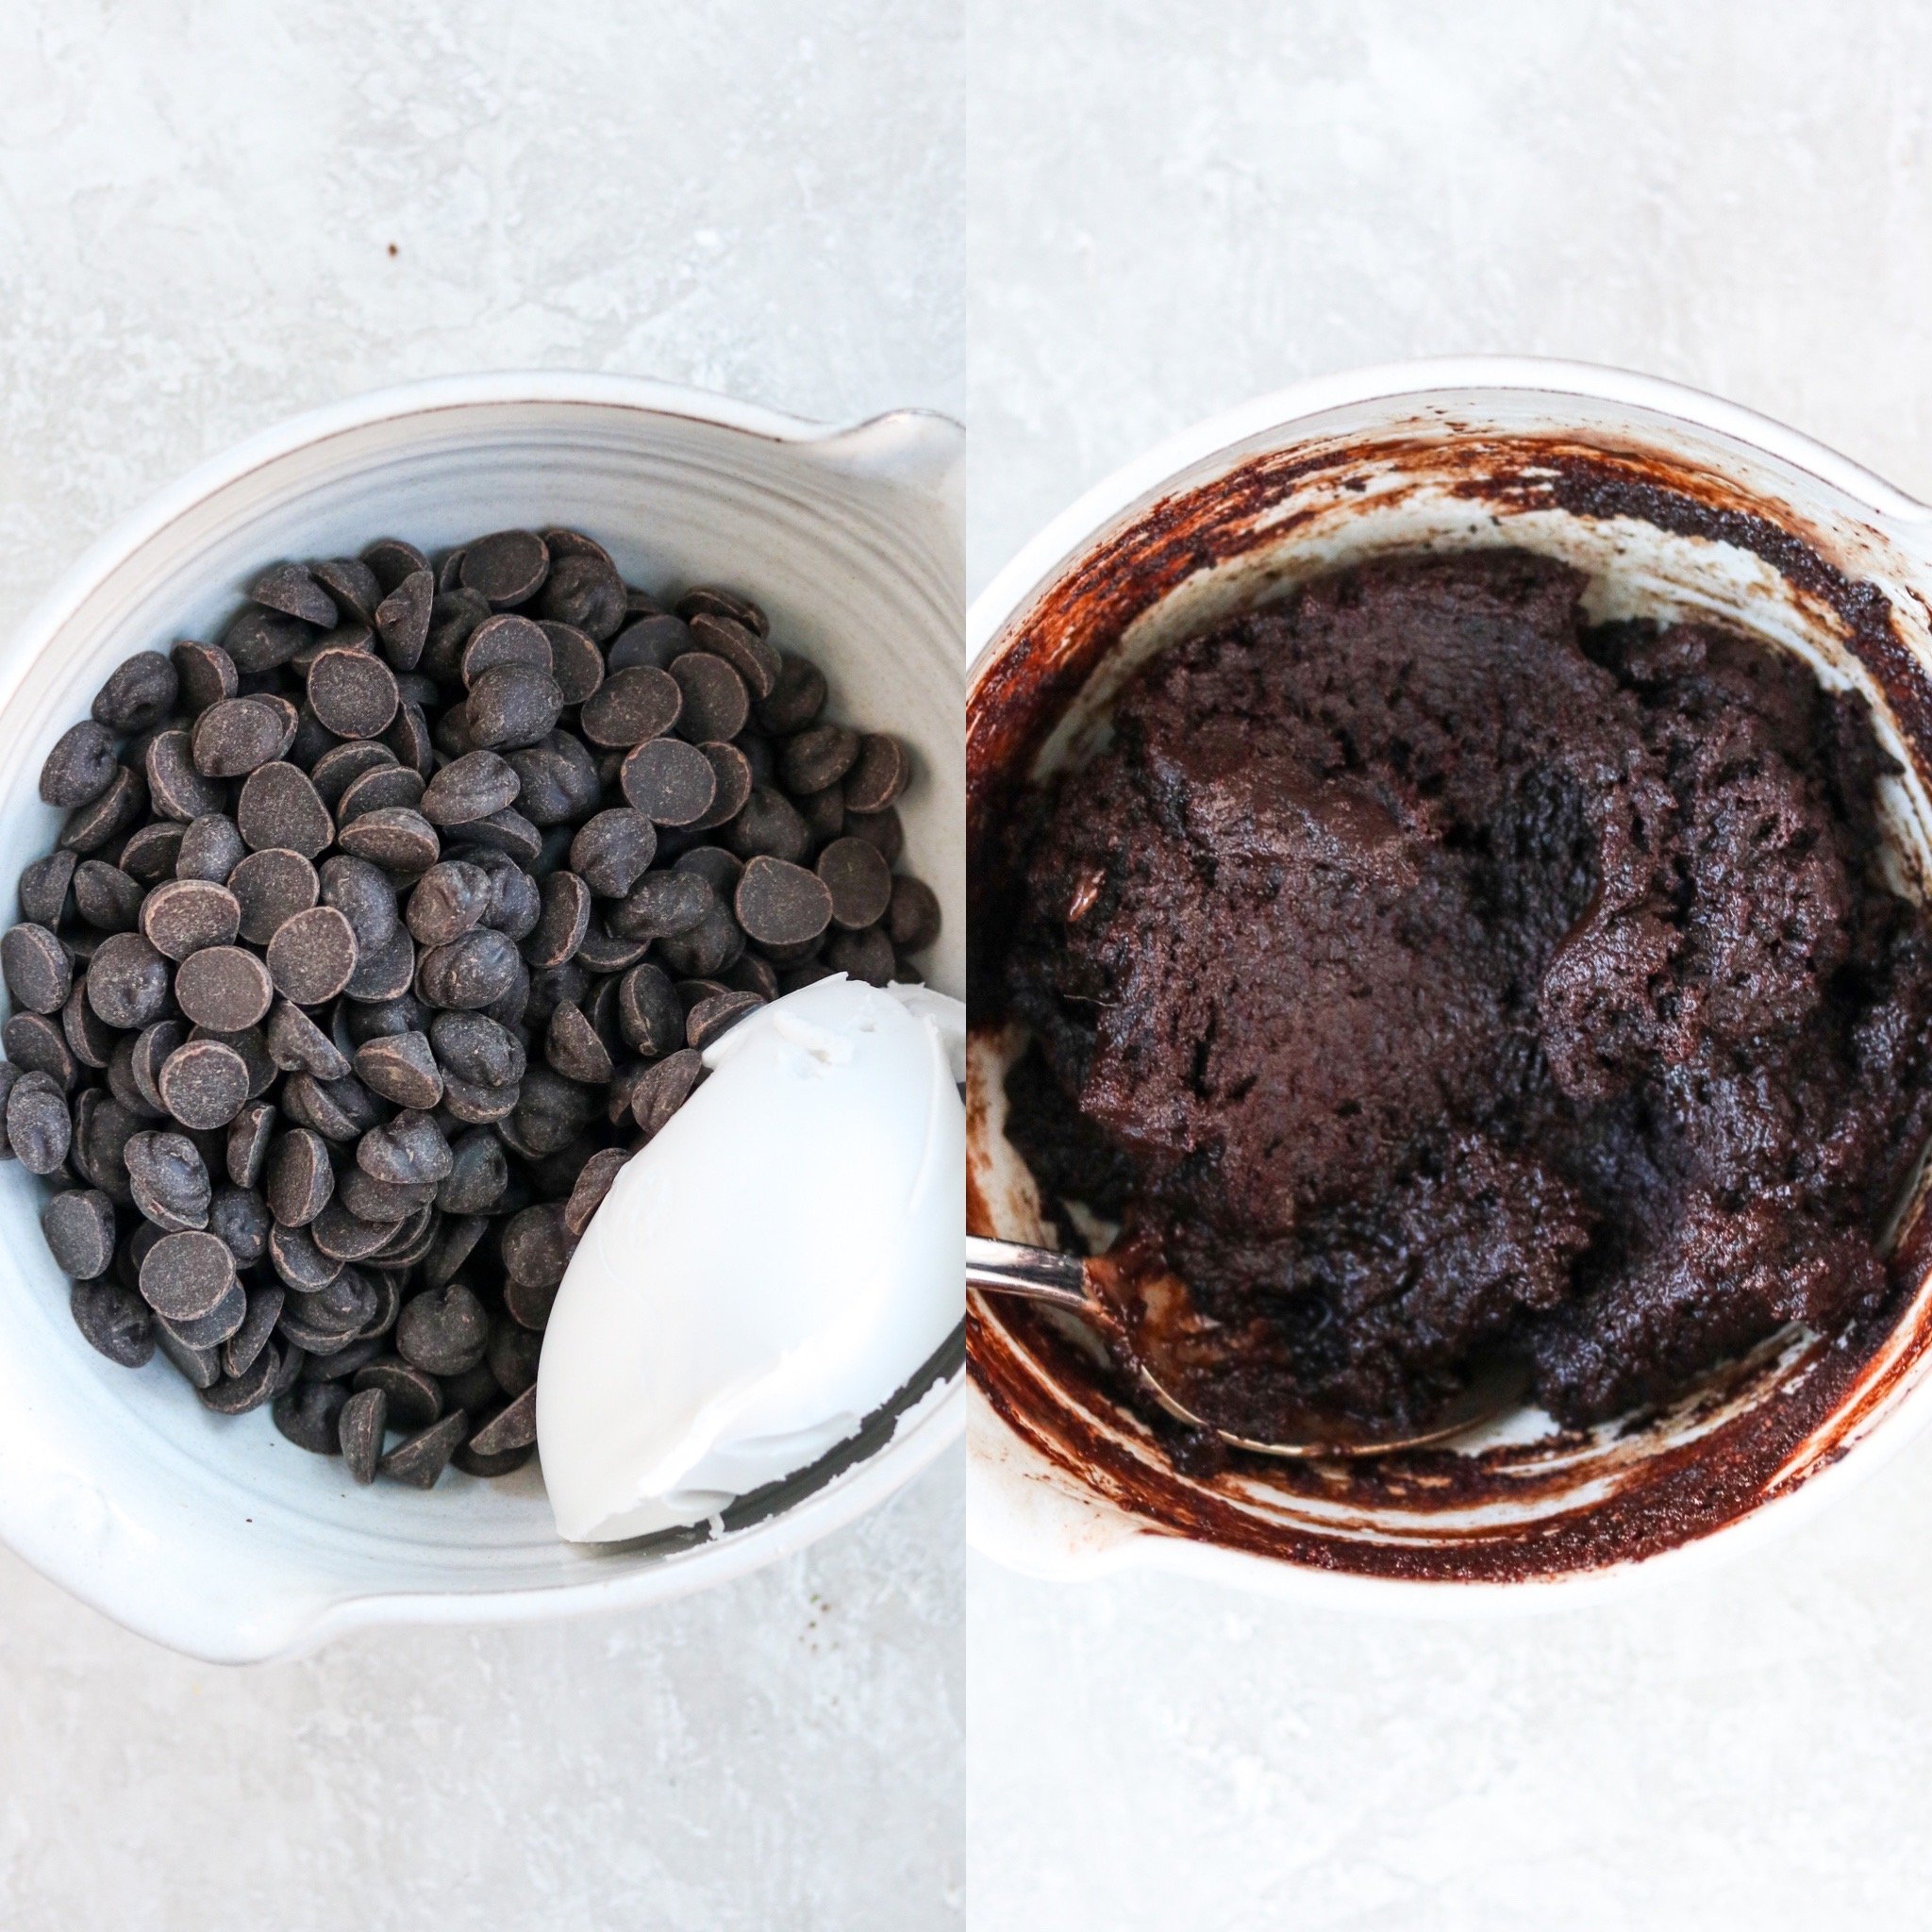 Steps to make dairy free chocolate ganache: chocolate chips and coconut milk in a bowl. Mixed and unmixed